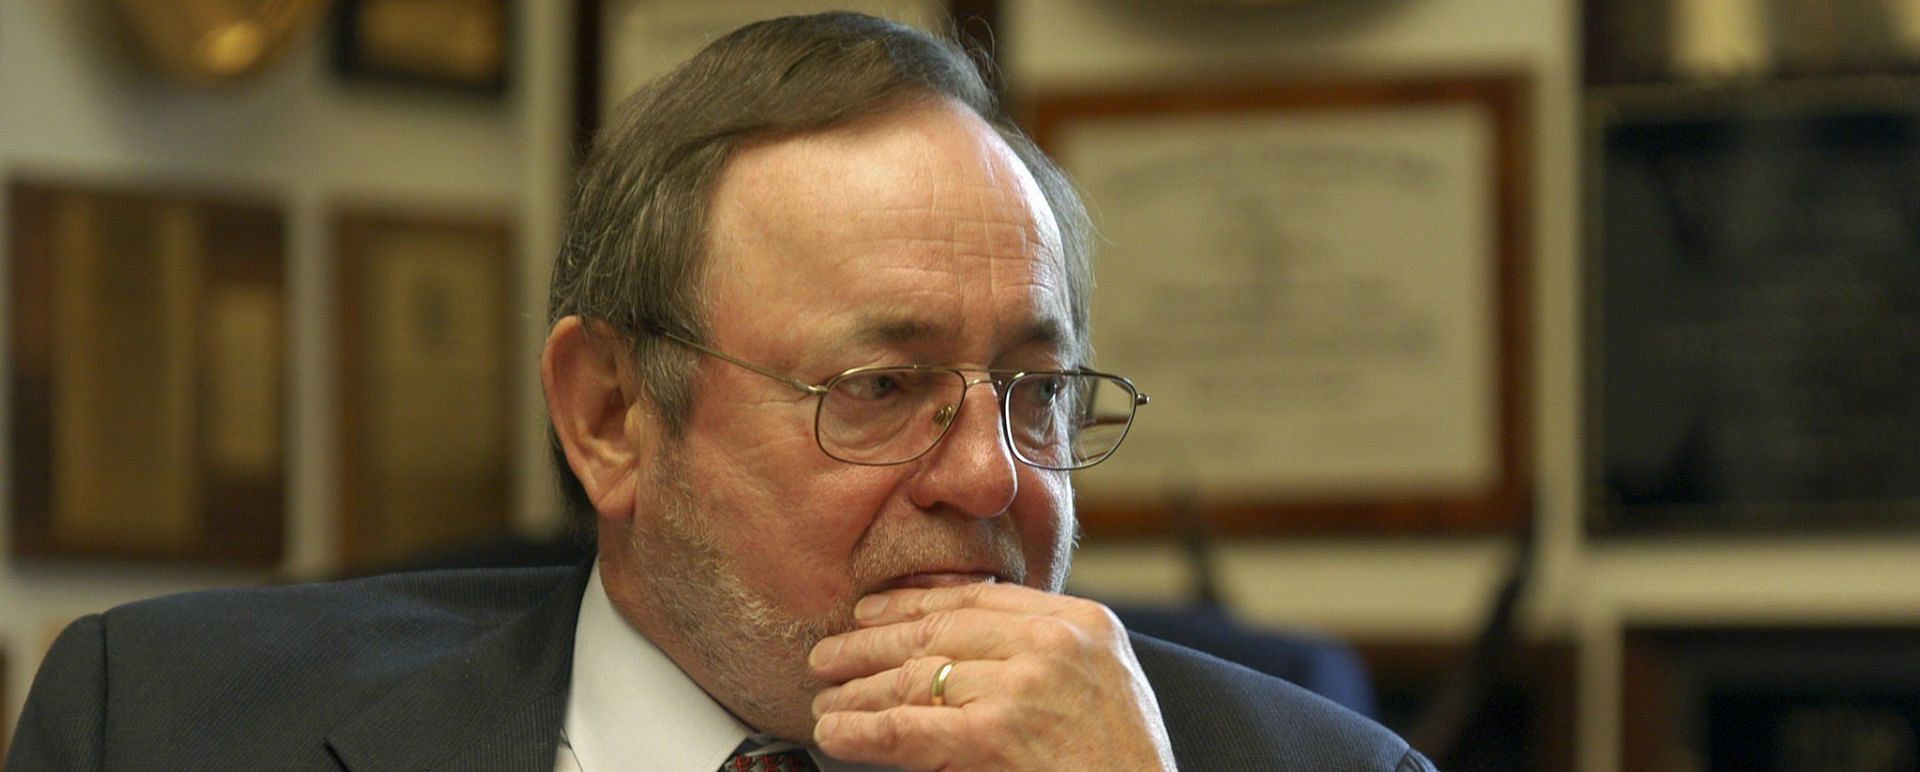 Don Young was elected to Congress in 1973 and re-elected 24 times (Image via Chris Maddaloni/Getty Images)